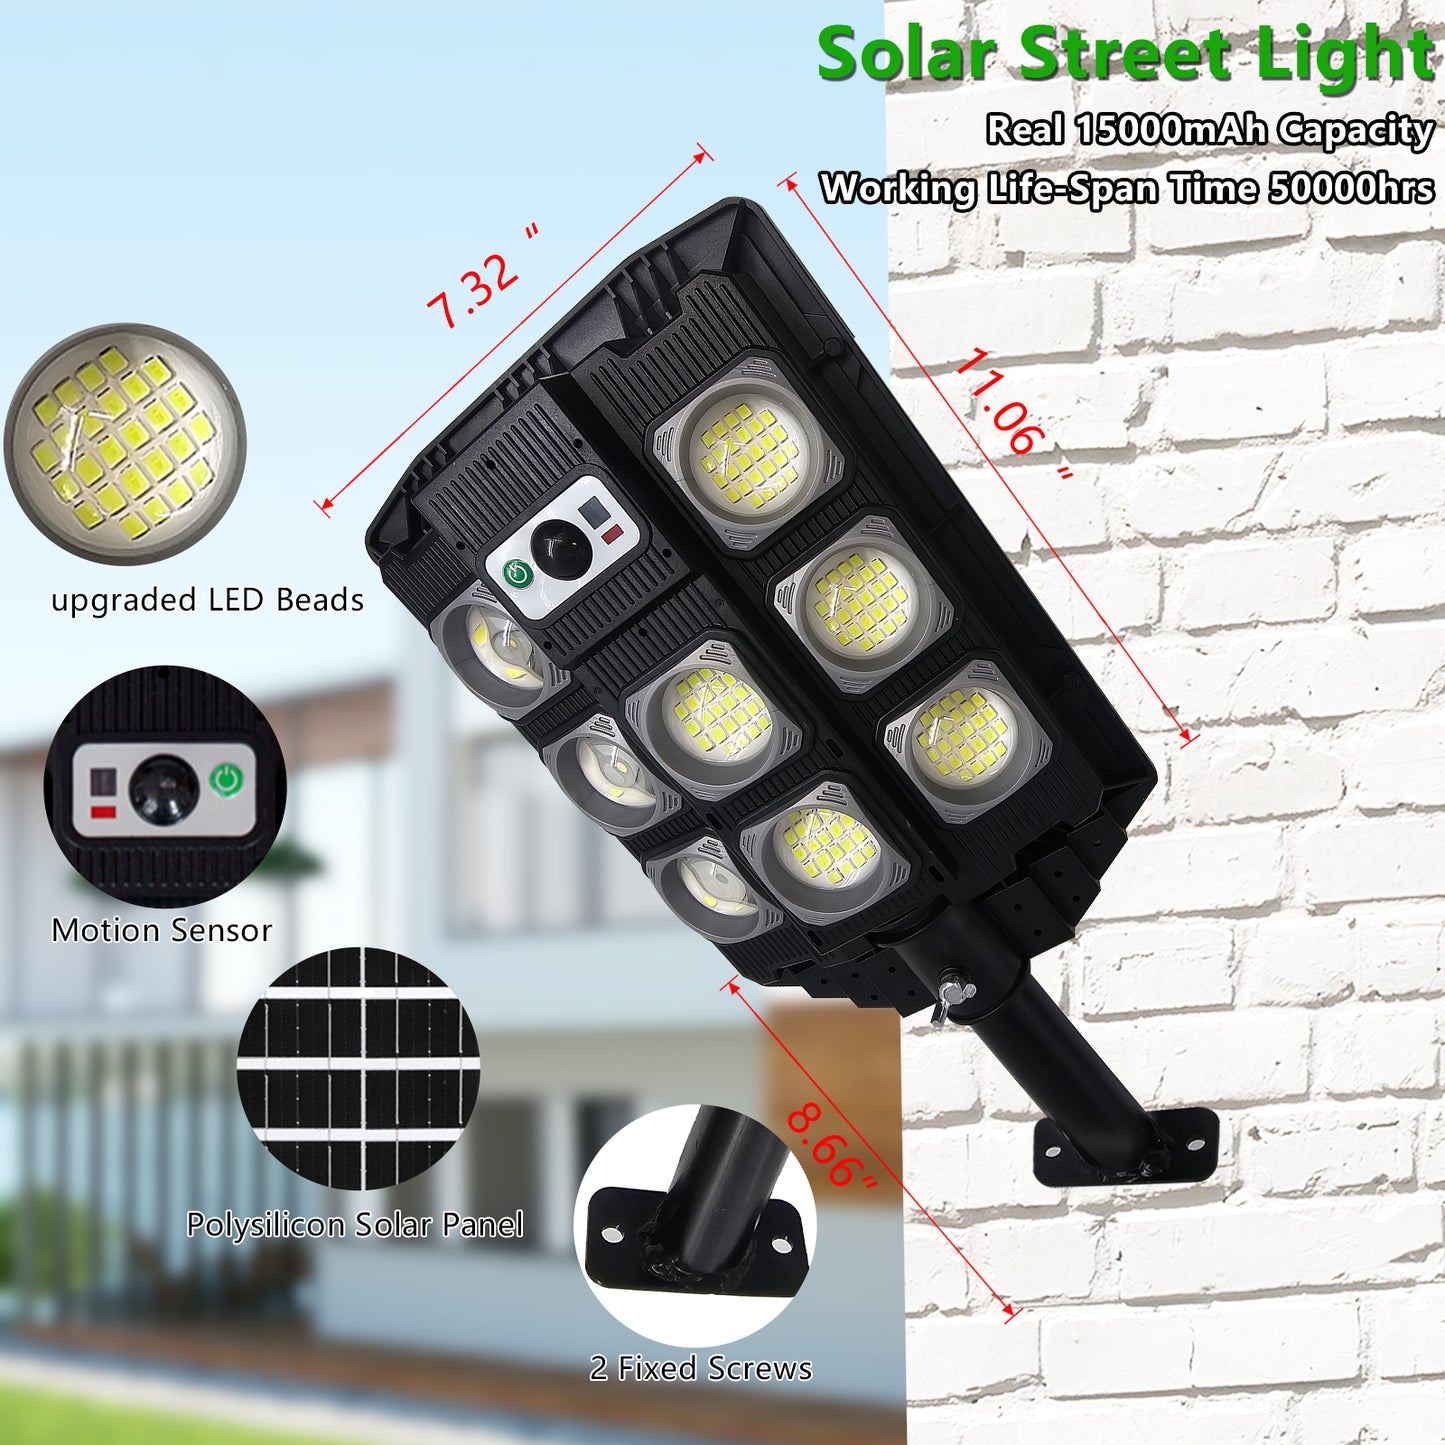 Super Bright Solar Street Lights, 2500W 80000LM Dusk to Dawn Solar Security Street Lights with Pole, Motion Sensor Outdoor Flood Lights for Garden Yard Patio Parking Lot, 2 Pack